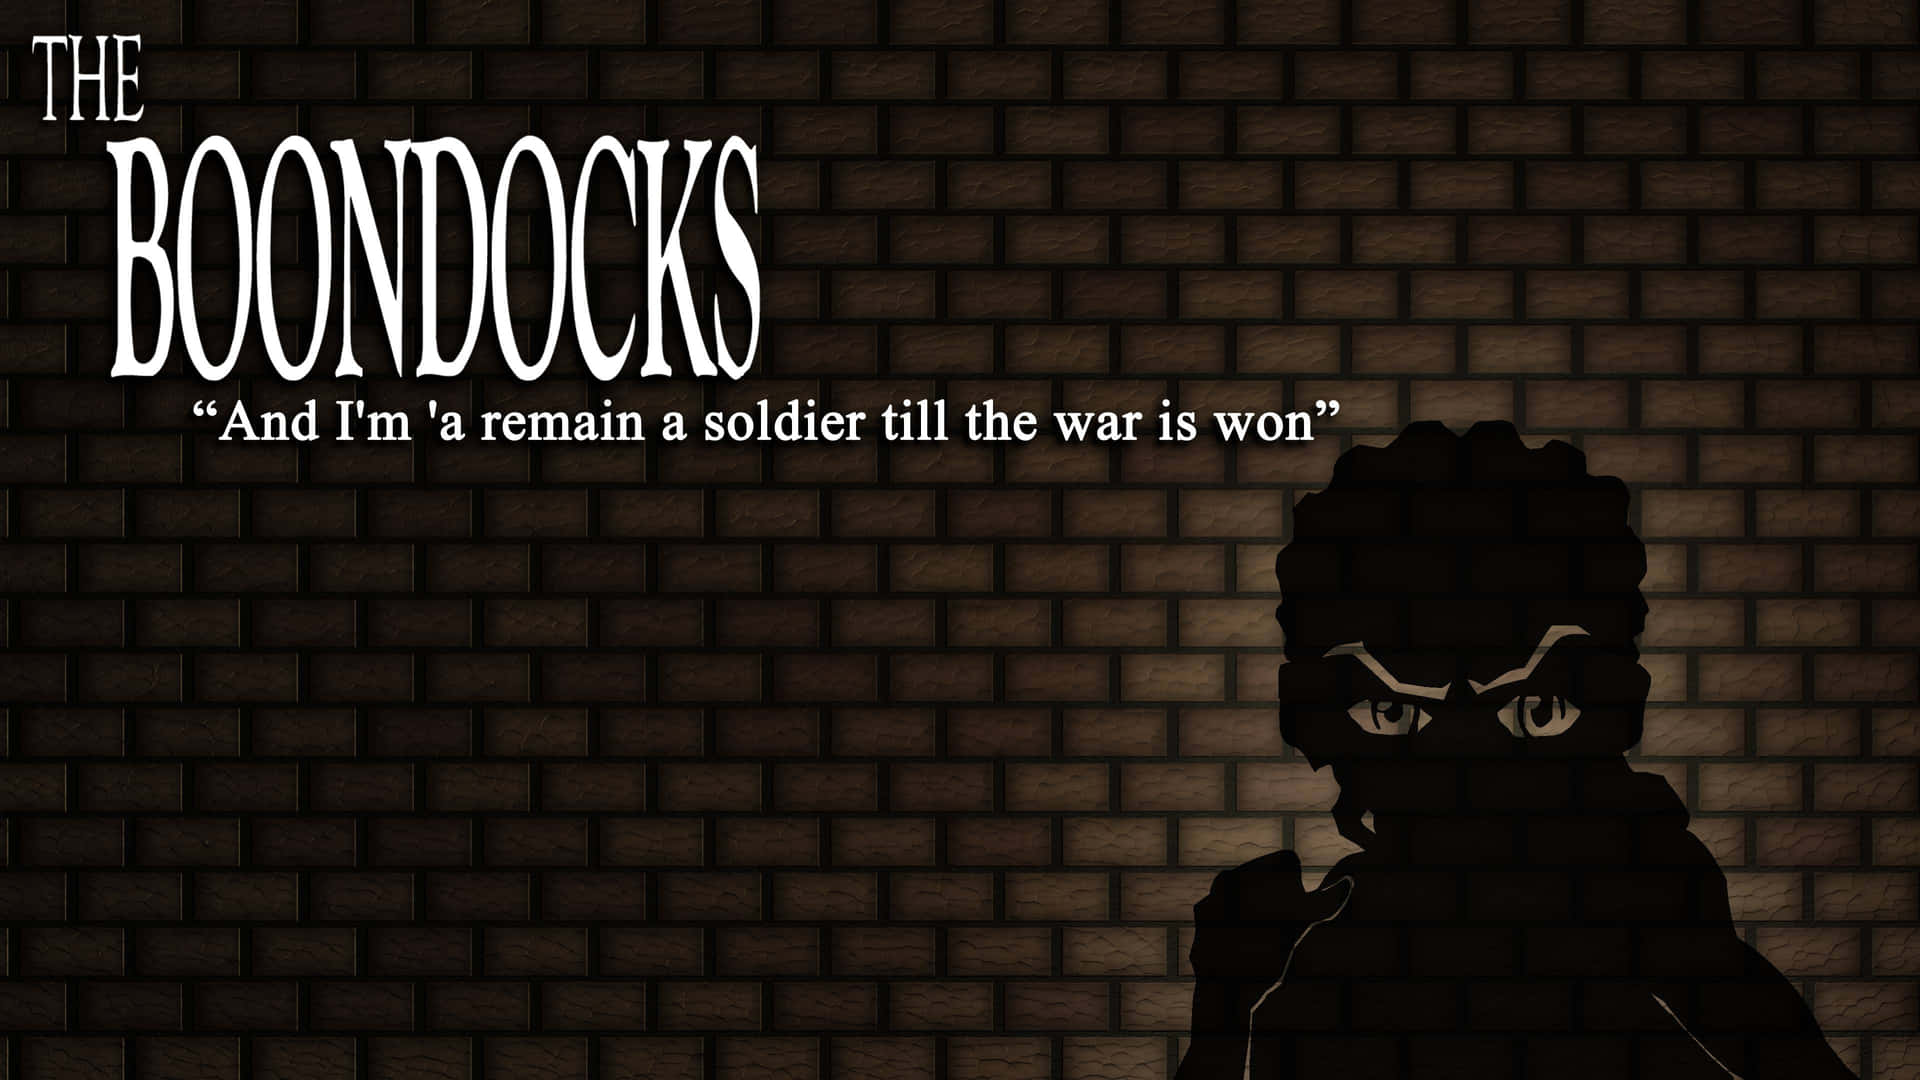 Dive into the world of The Boondocks